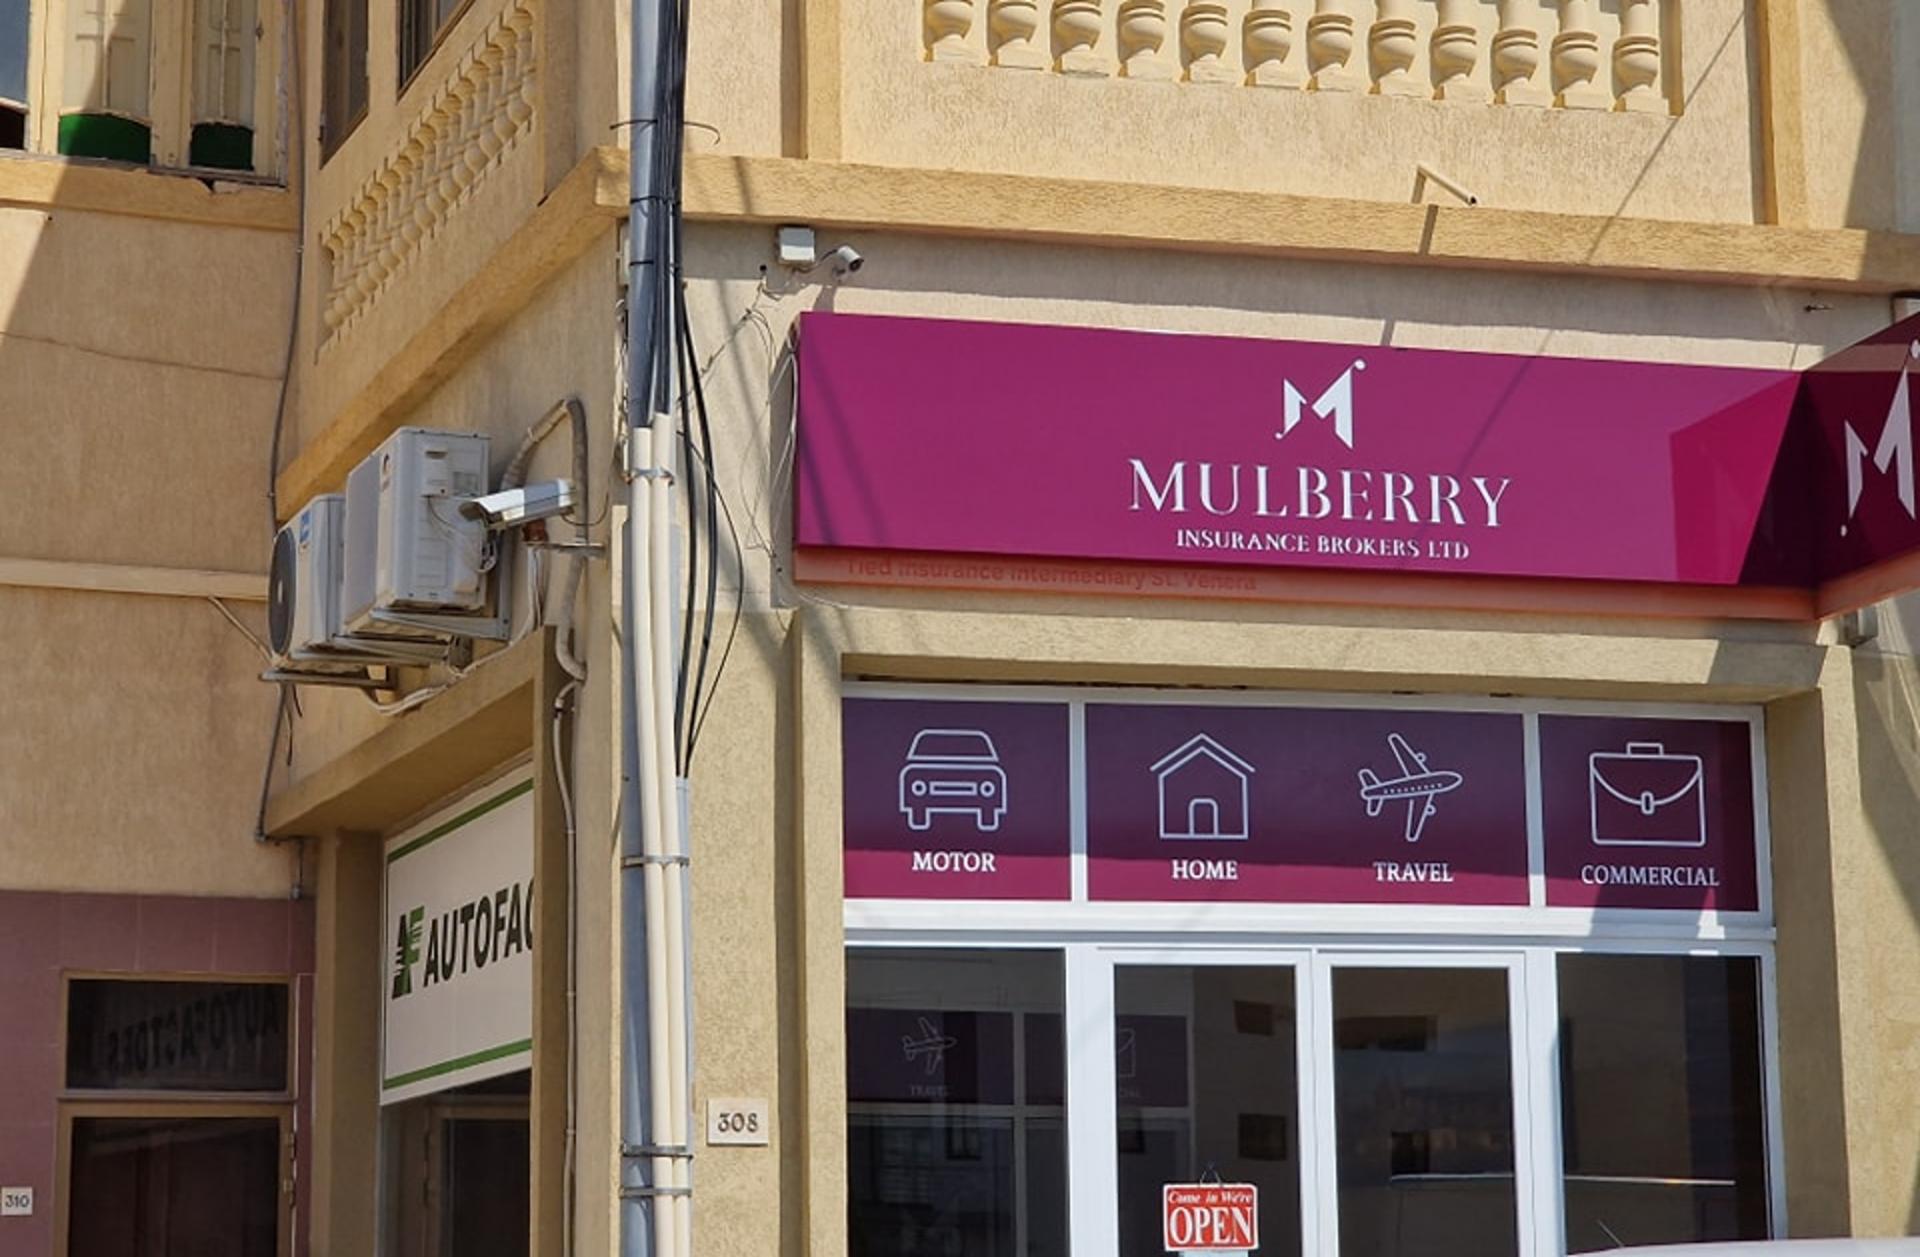 Mulberry Insurance Brokers acquired by Bristol firm